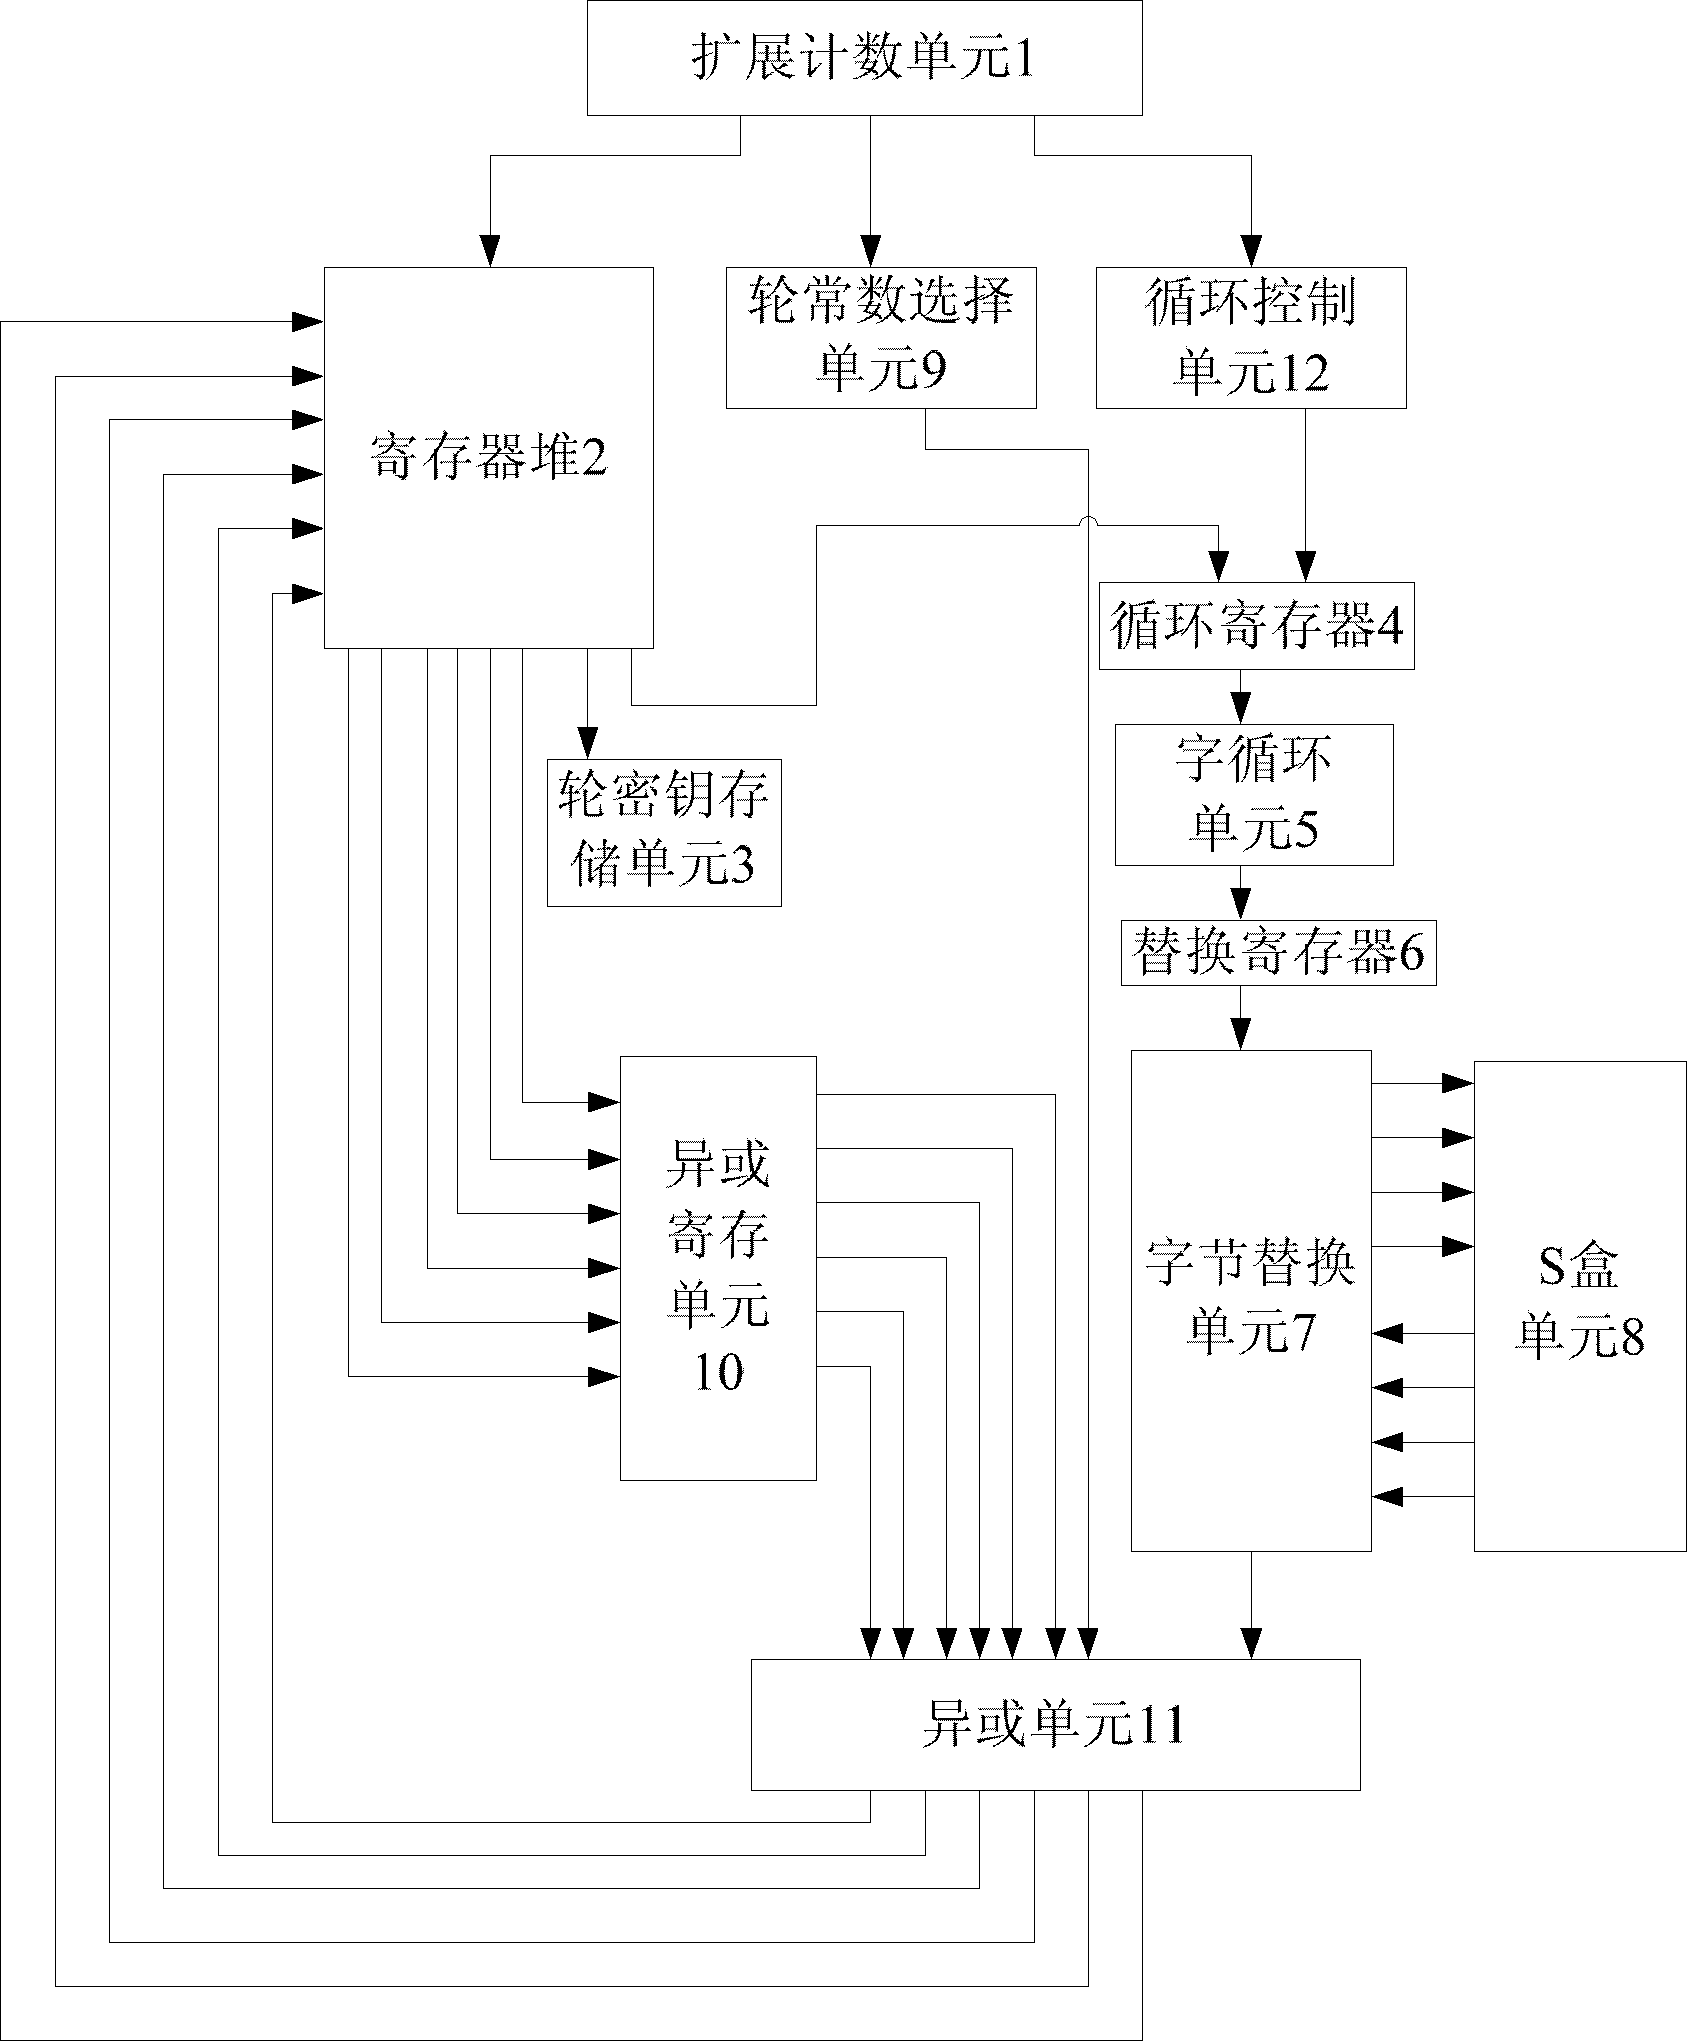 AES-based 192-bit key extension system and method